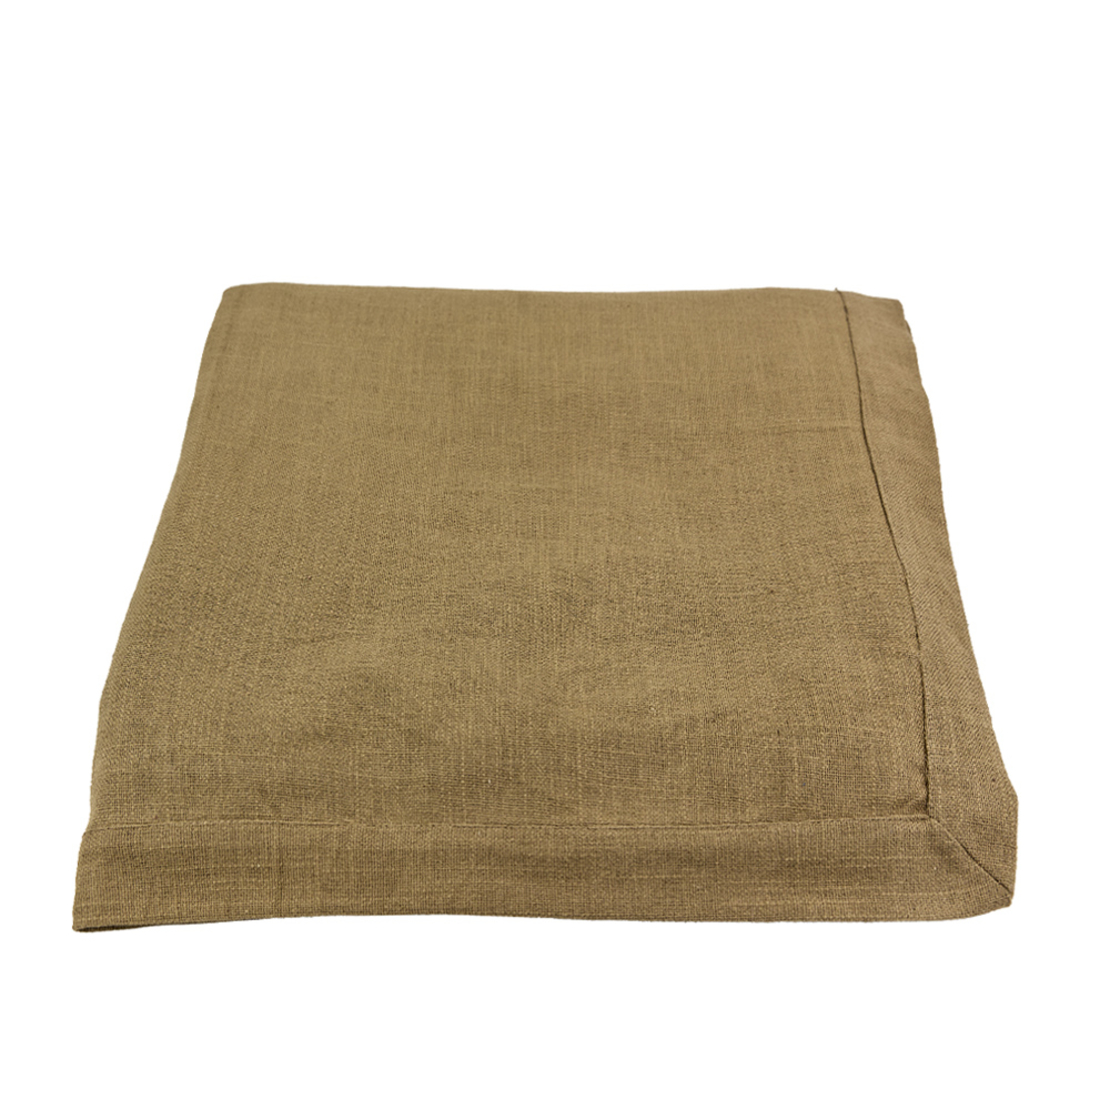 MANTEL OLIVE C TABLECLOTH/RUNNER COTTON OLIVE GREE